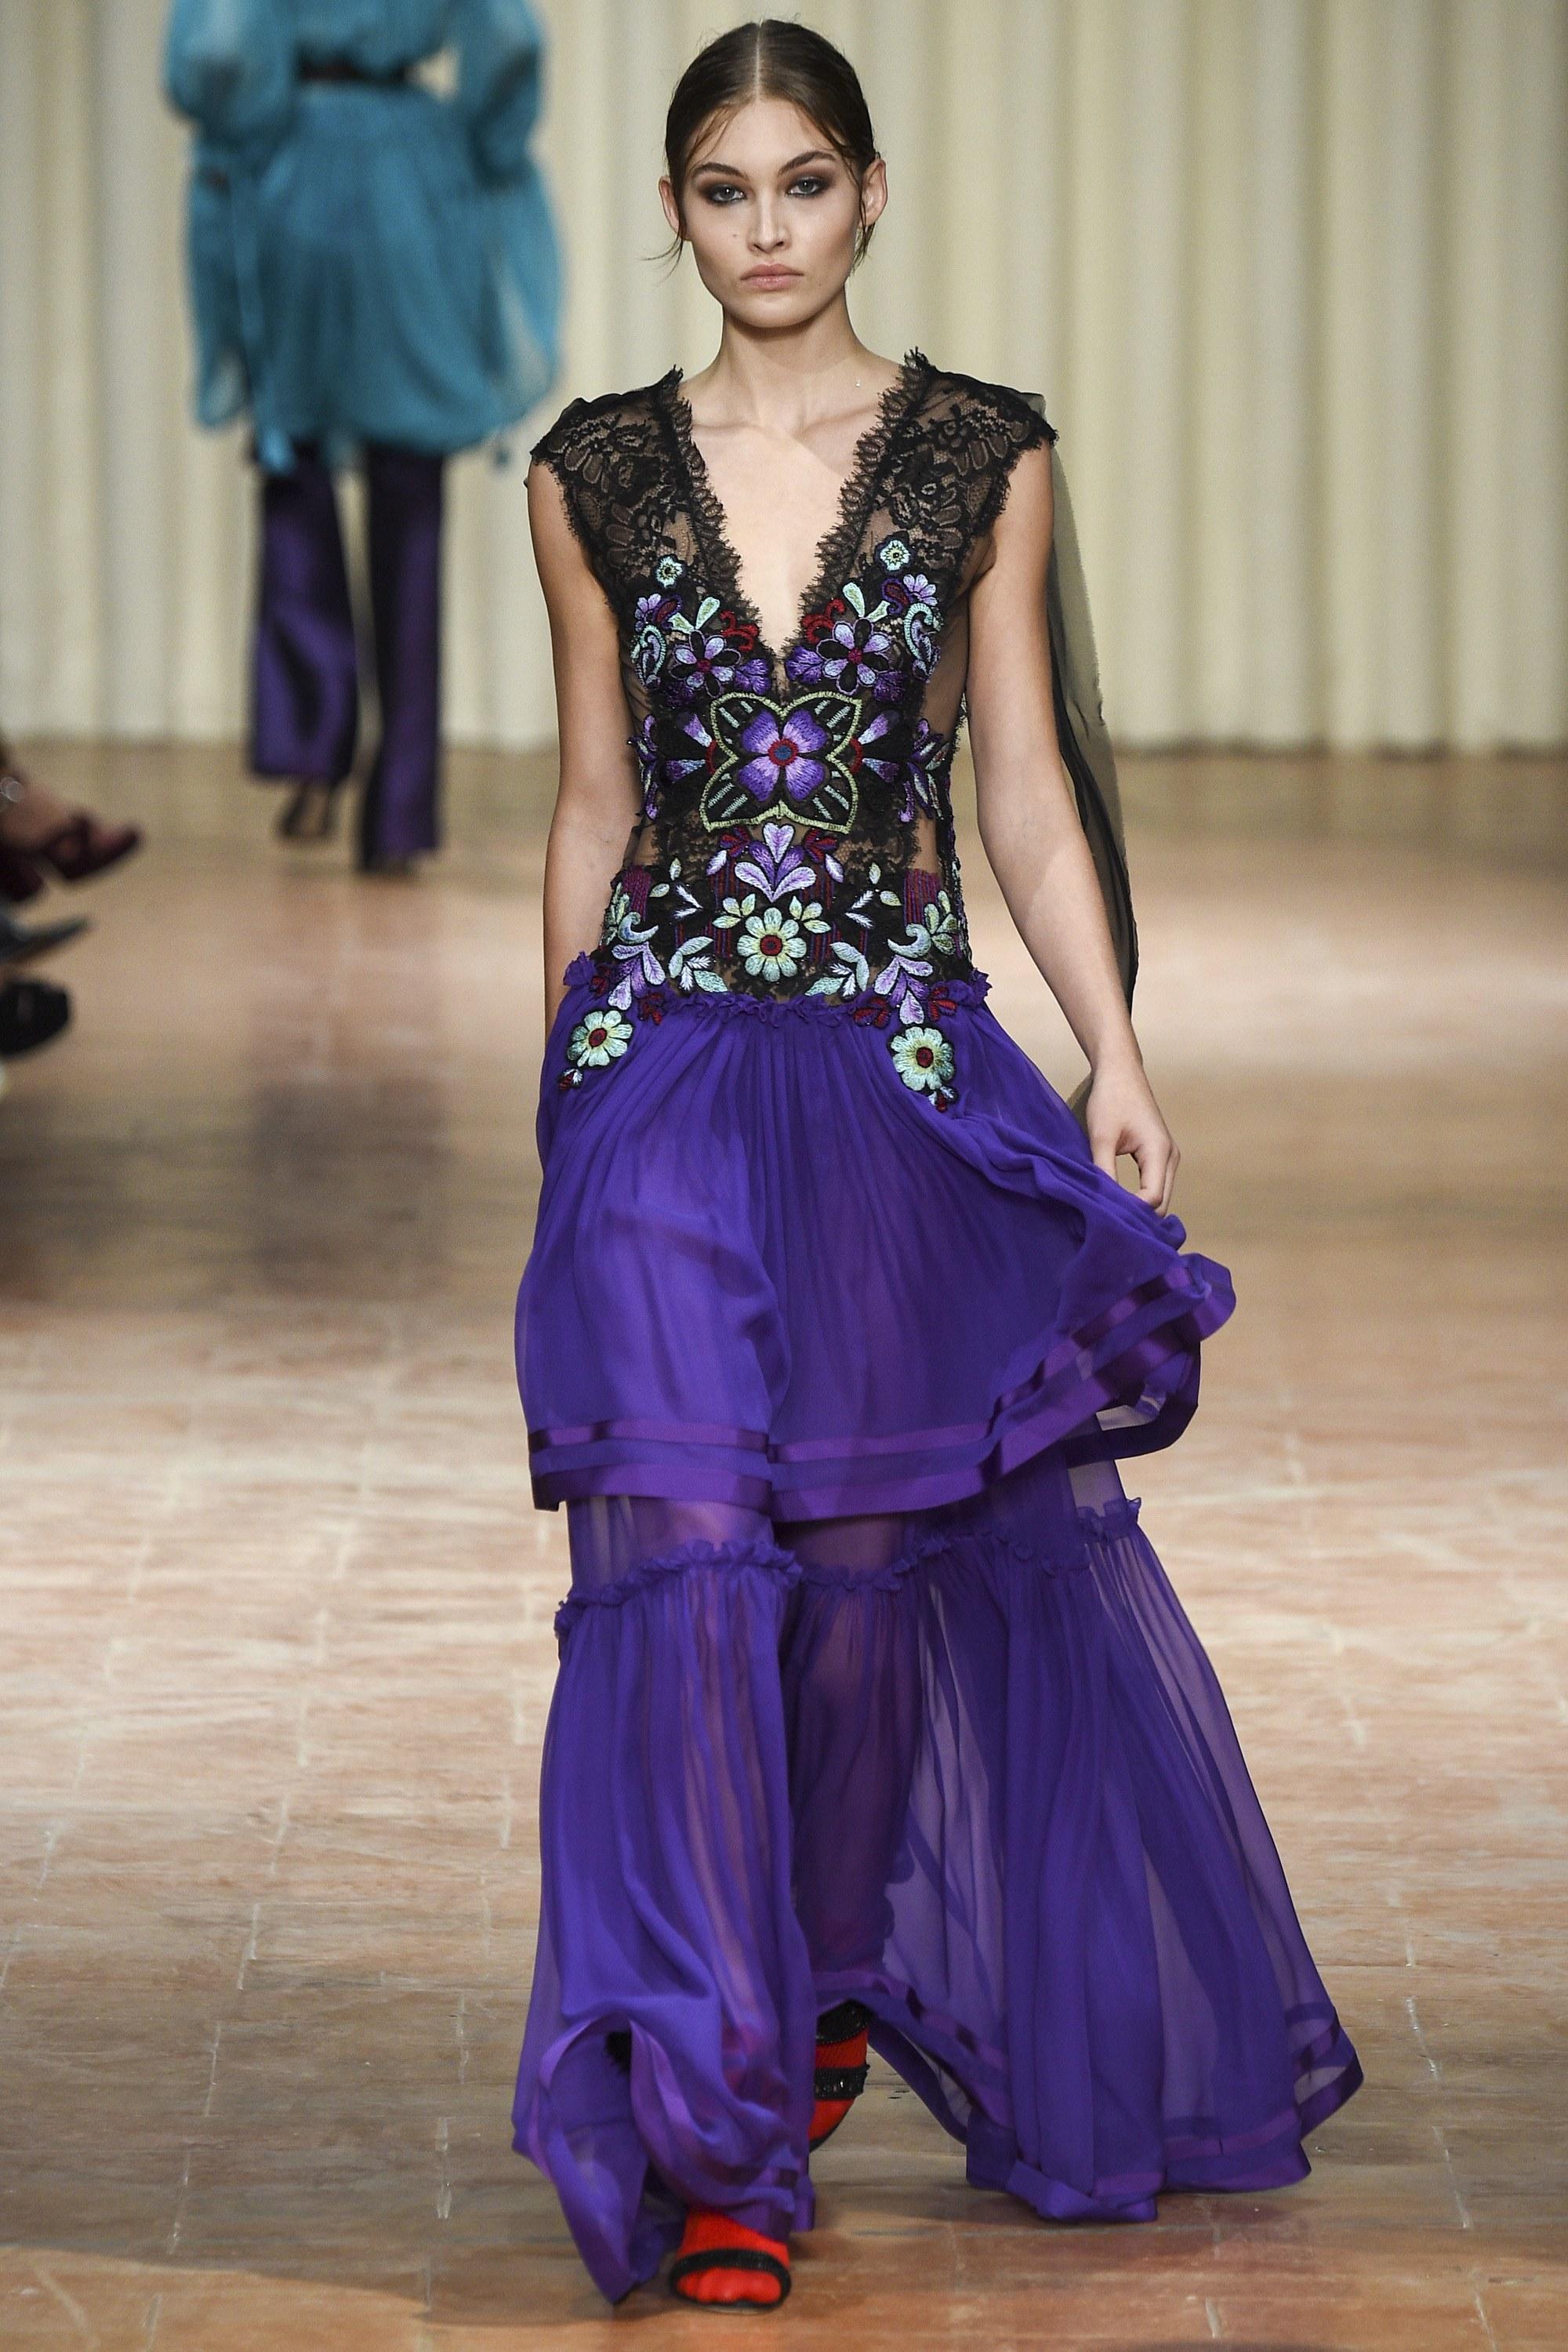 New Alberta Ferretti Beaded and Embroidered Purple Long Dress Gown
Alberta Ferretti Spring Summer 2017 – The Alberta Ferretti collection saw a change of direction for the brand. There was a recognizable departure from the romantic whimsicality of